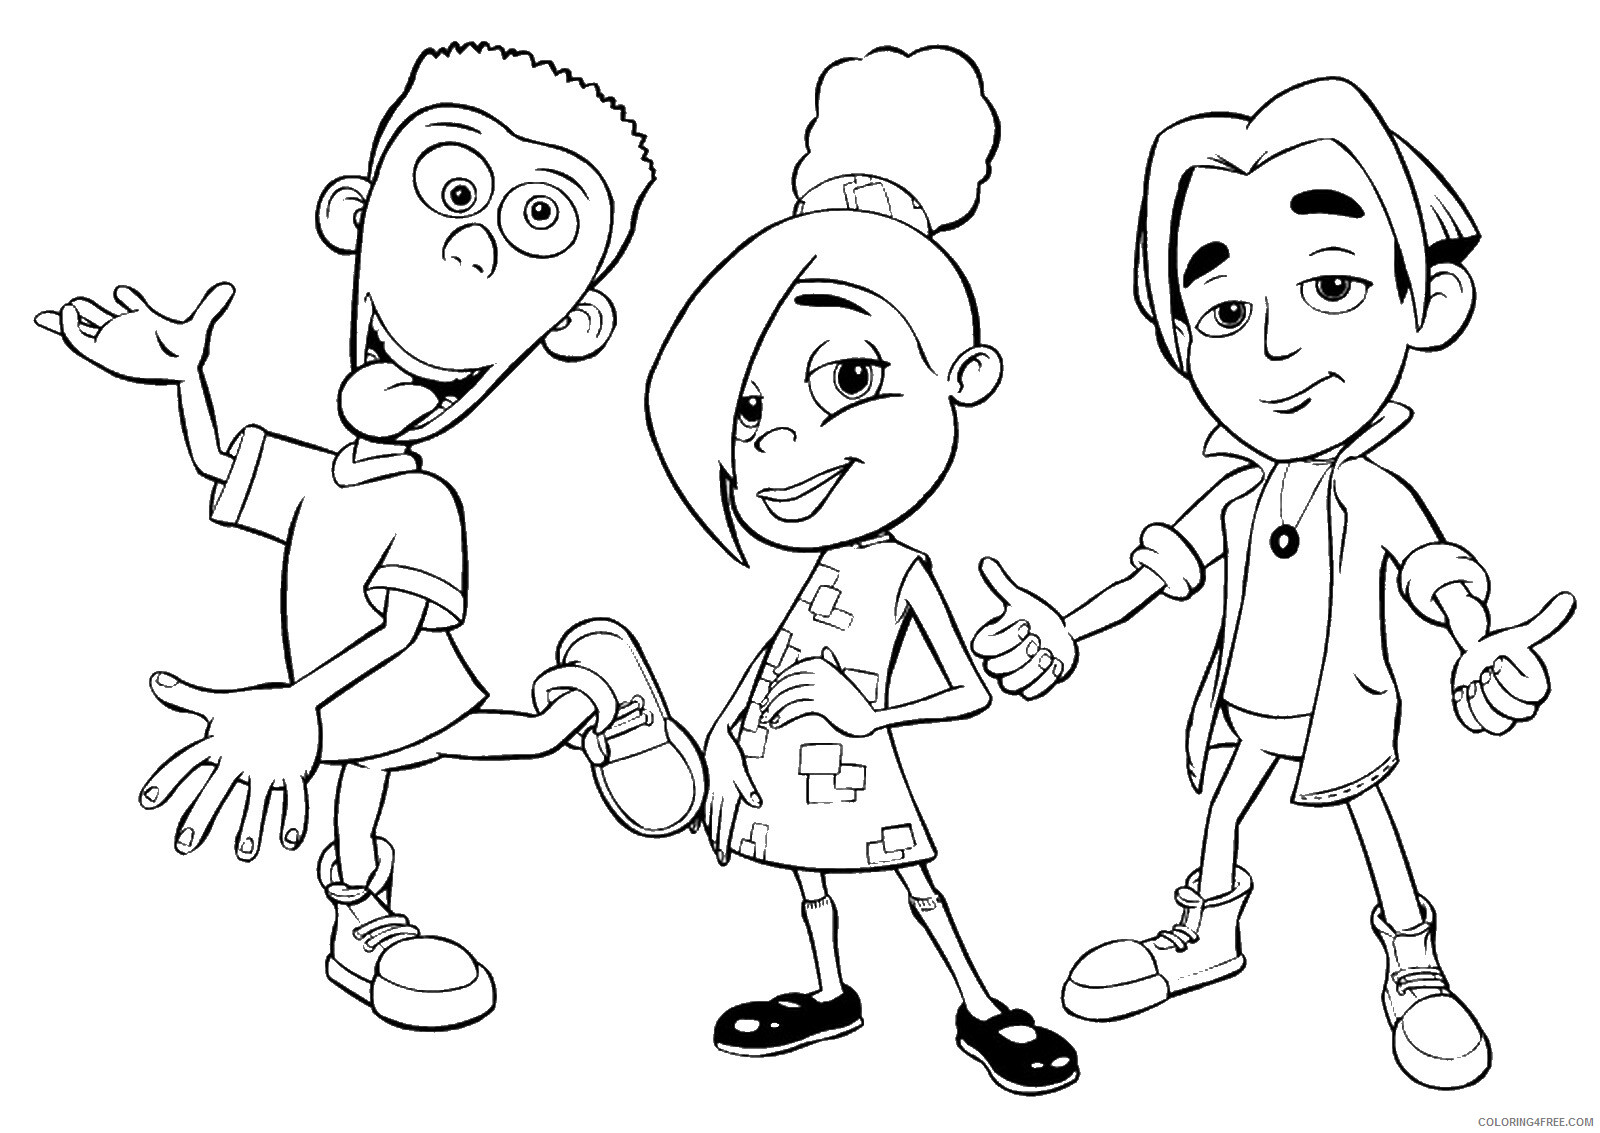 Jimmy Neutron Coloring Pages TV Film jimmy_neutron_cl25 Printable 2020 04138 Coloring4free